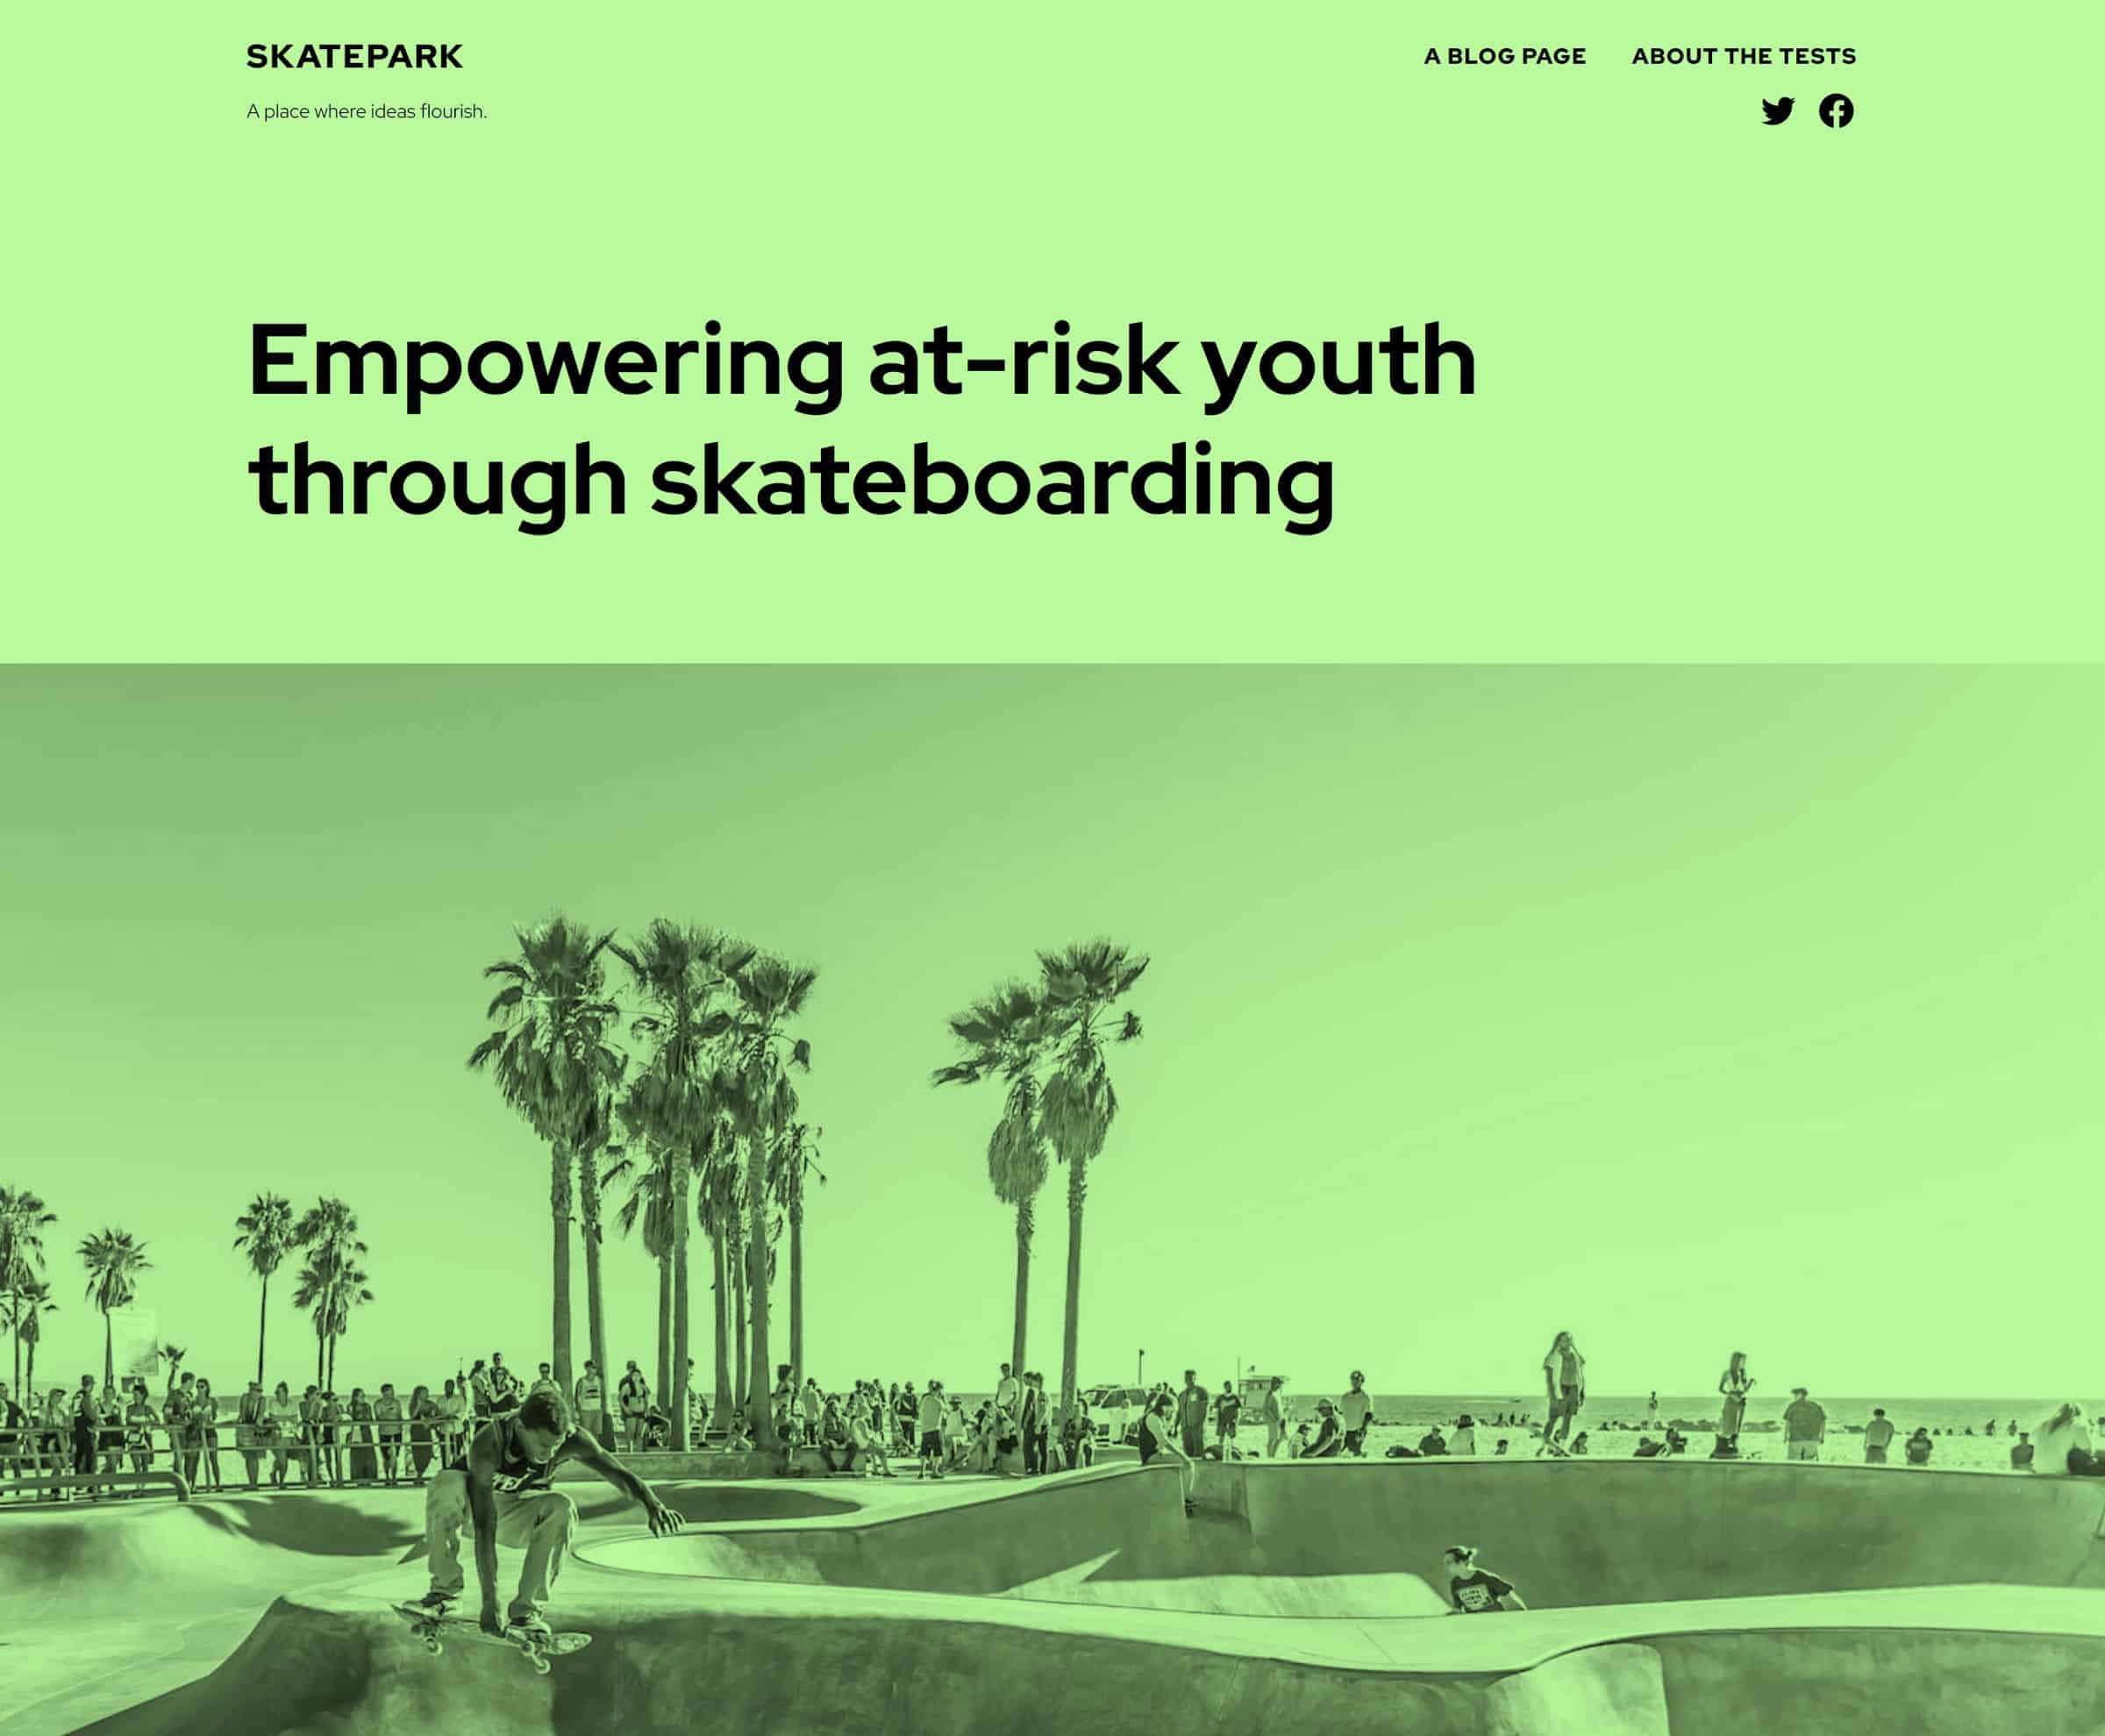 Skatepark-is-a-bold-and-vibrant-block-theme-for-events-and-organizations